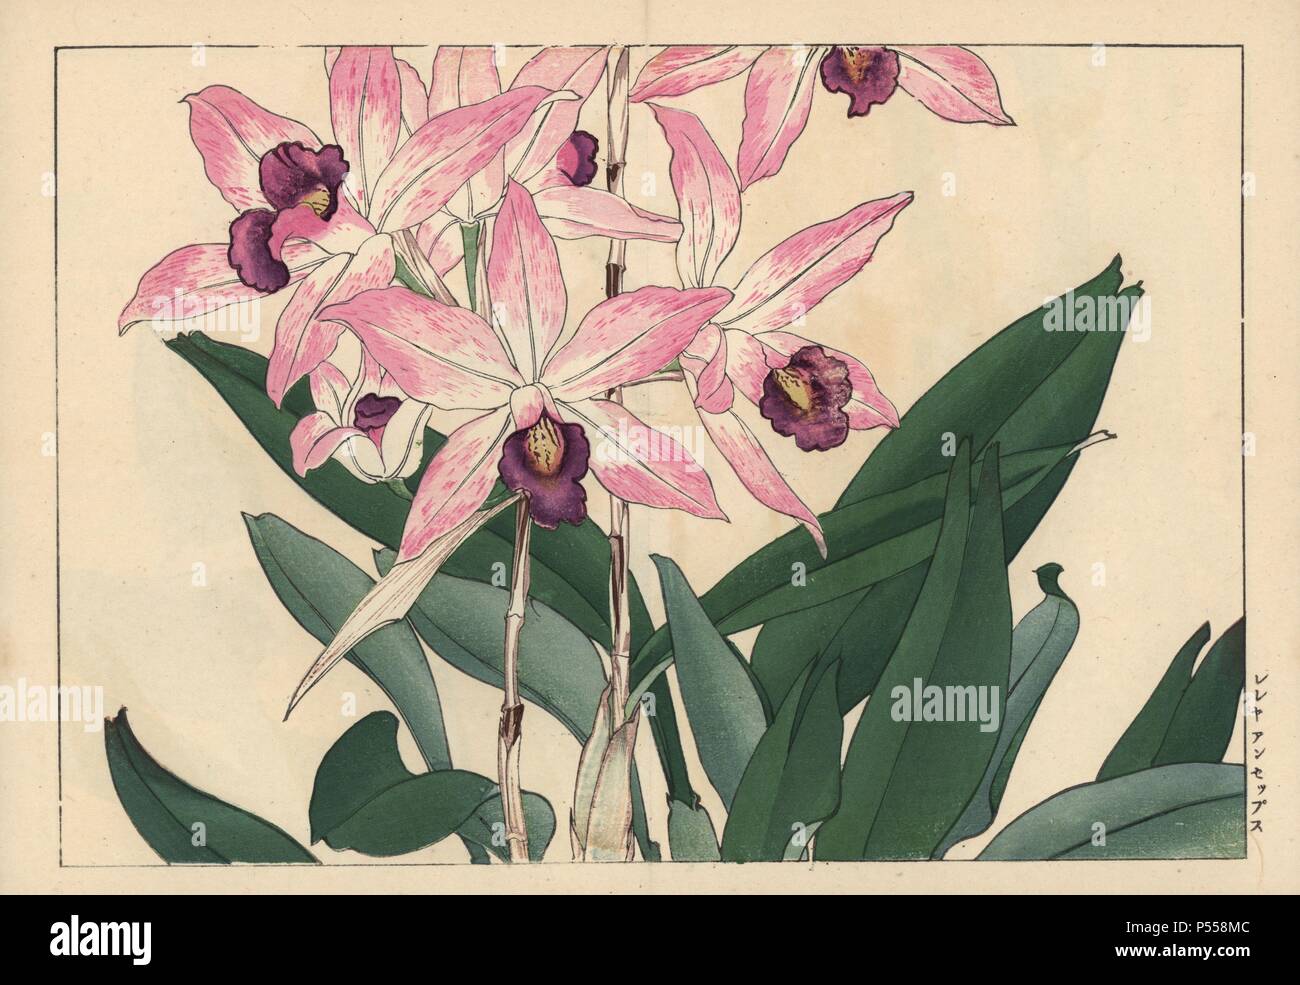 Laelia anceps orchid. Handcoloured woodblock print from Konan Tanigami's 'Seiyou Sokazufu' (Pictorial Album of Western Plants and Flowers: Autumn Winter), Unsodo, Kyoto, 1917. Tanigami (1879-1928) depicted 125 varieties of garden plants through the four seasons. Stock Photo